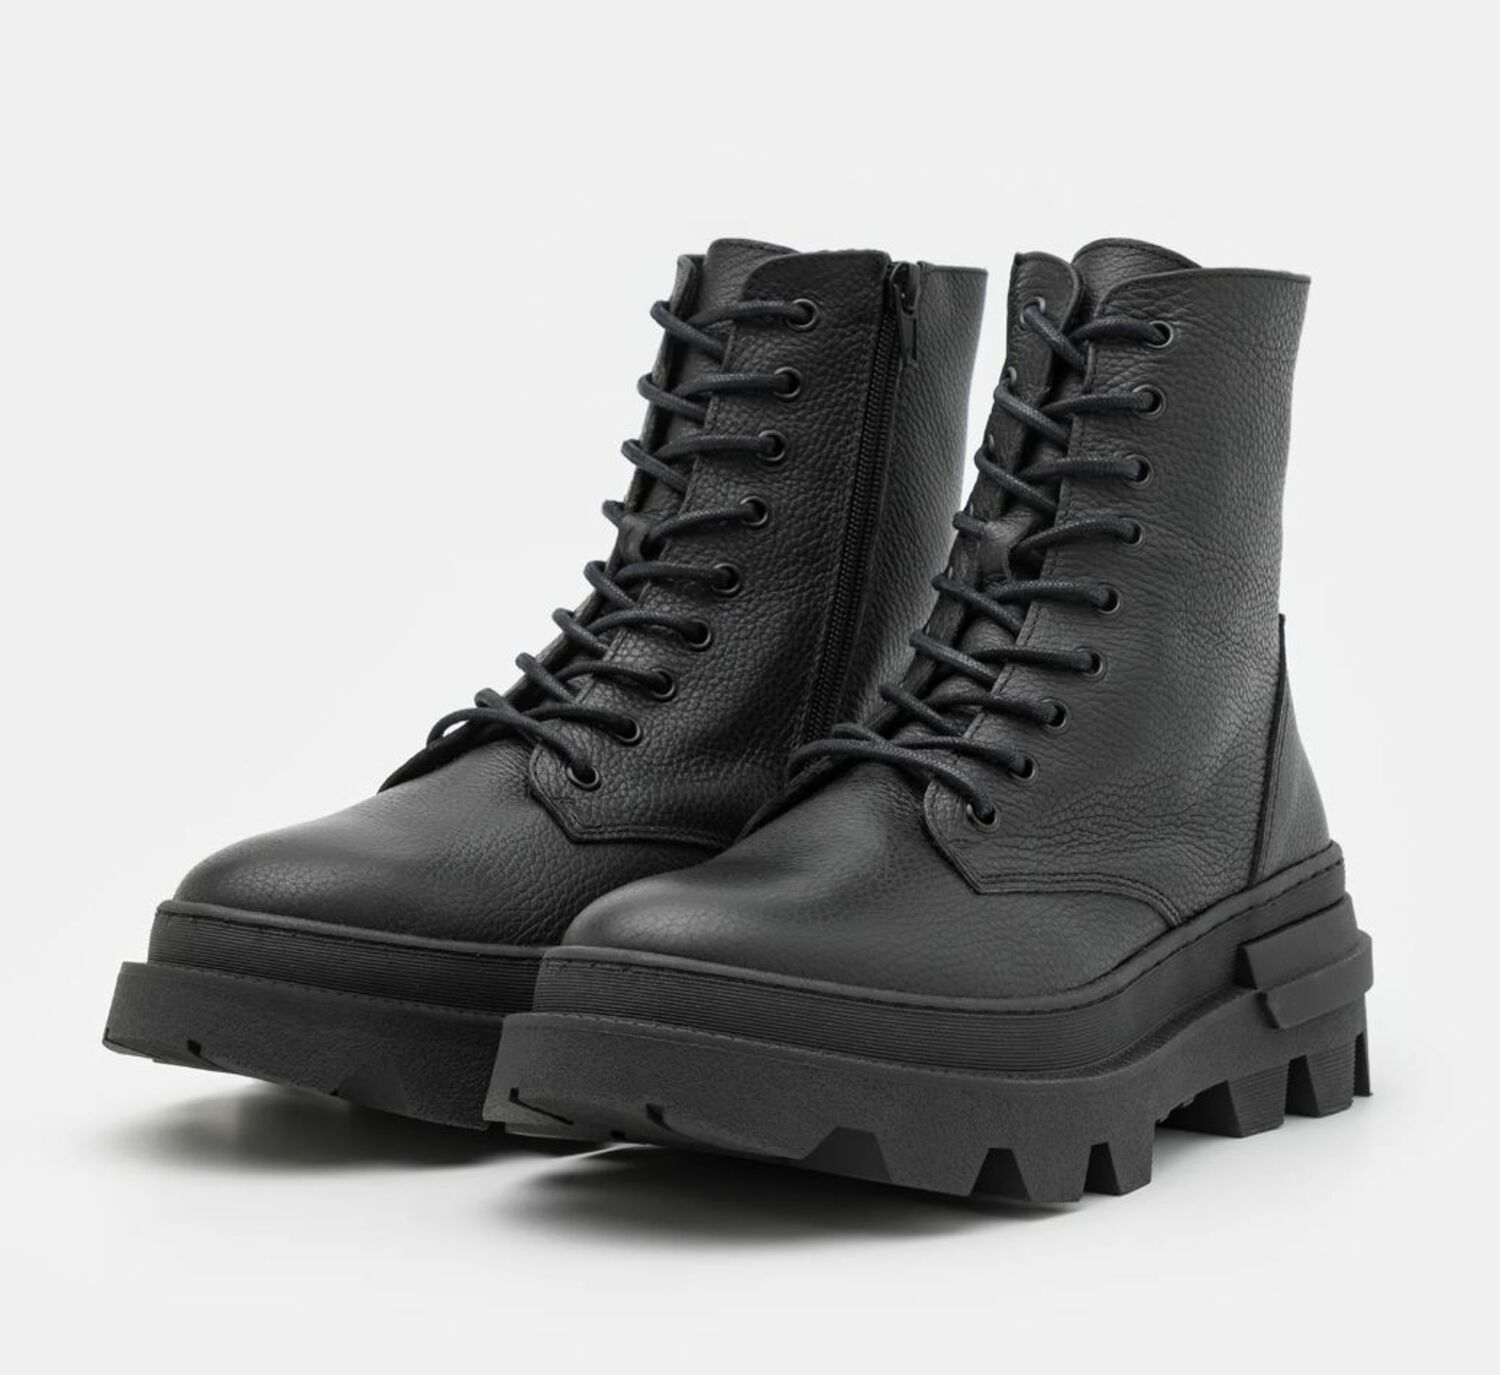 Steve Madden Combat boot Shoe Fashion boot, Boots Uk, leather, fashion,  outdoor Shoe png | PNGWing